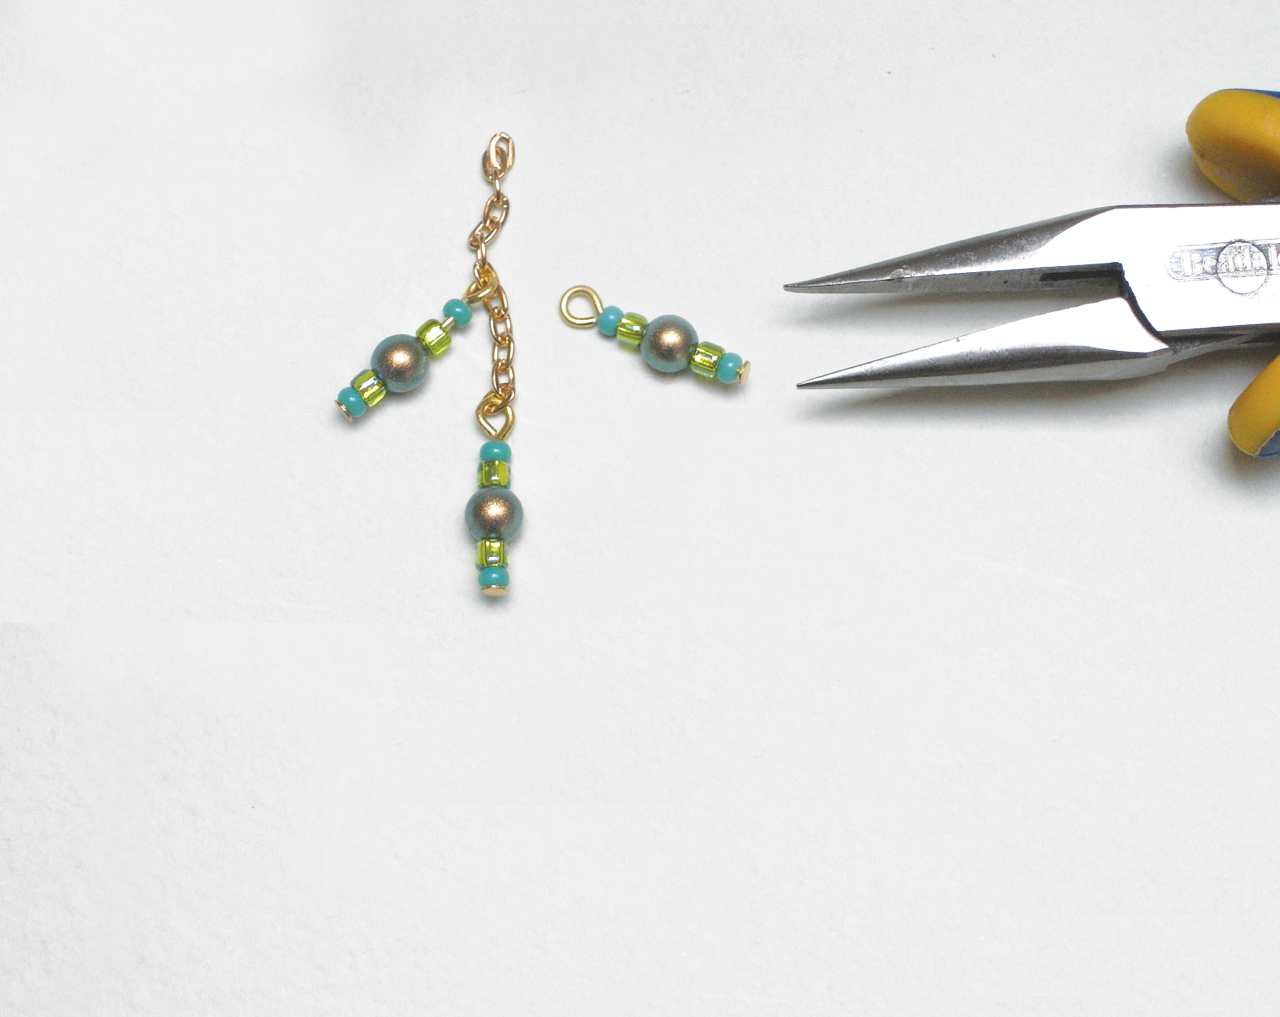 How to make peacock feather earrings